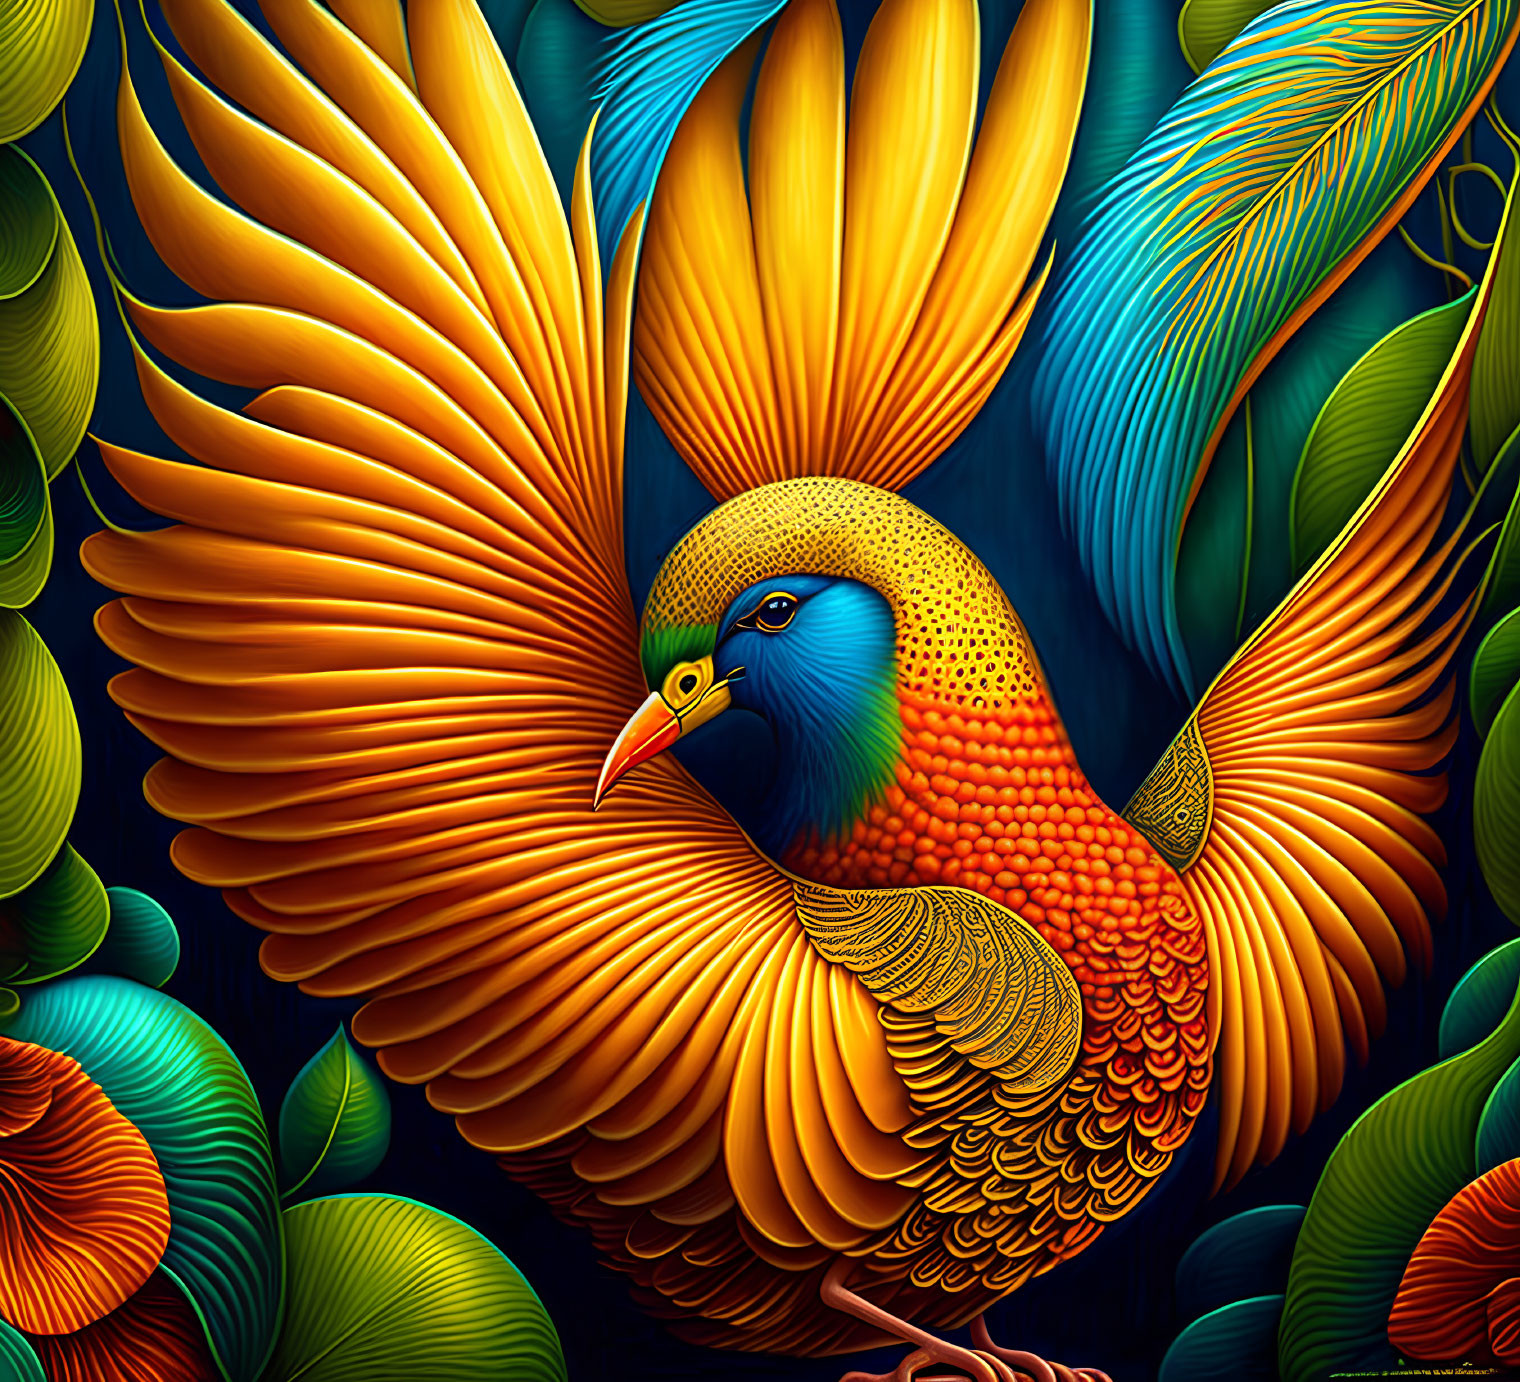 Vibrant digital artwork featuring bird with colorful wings